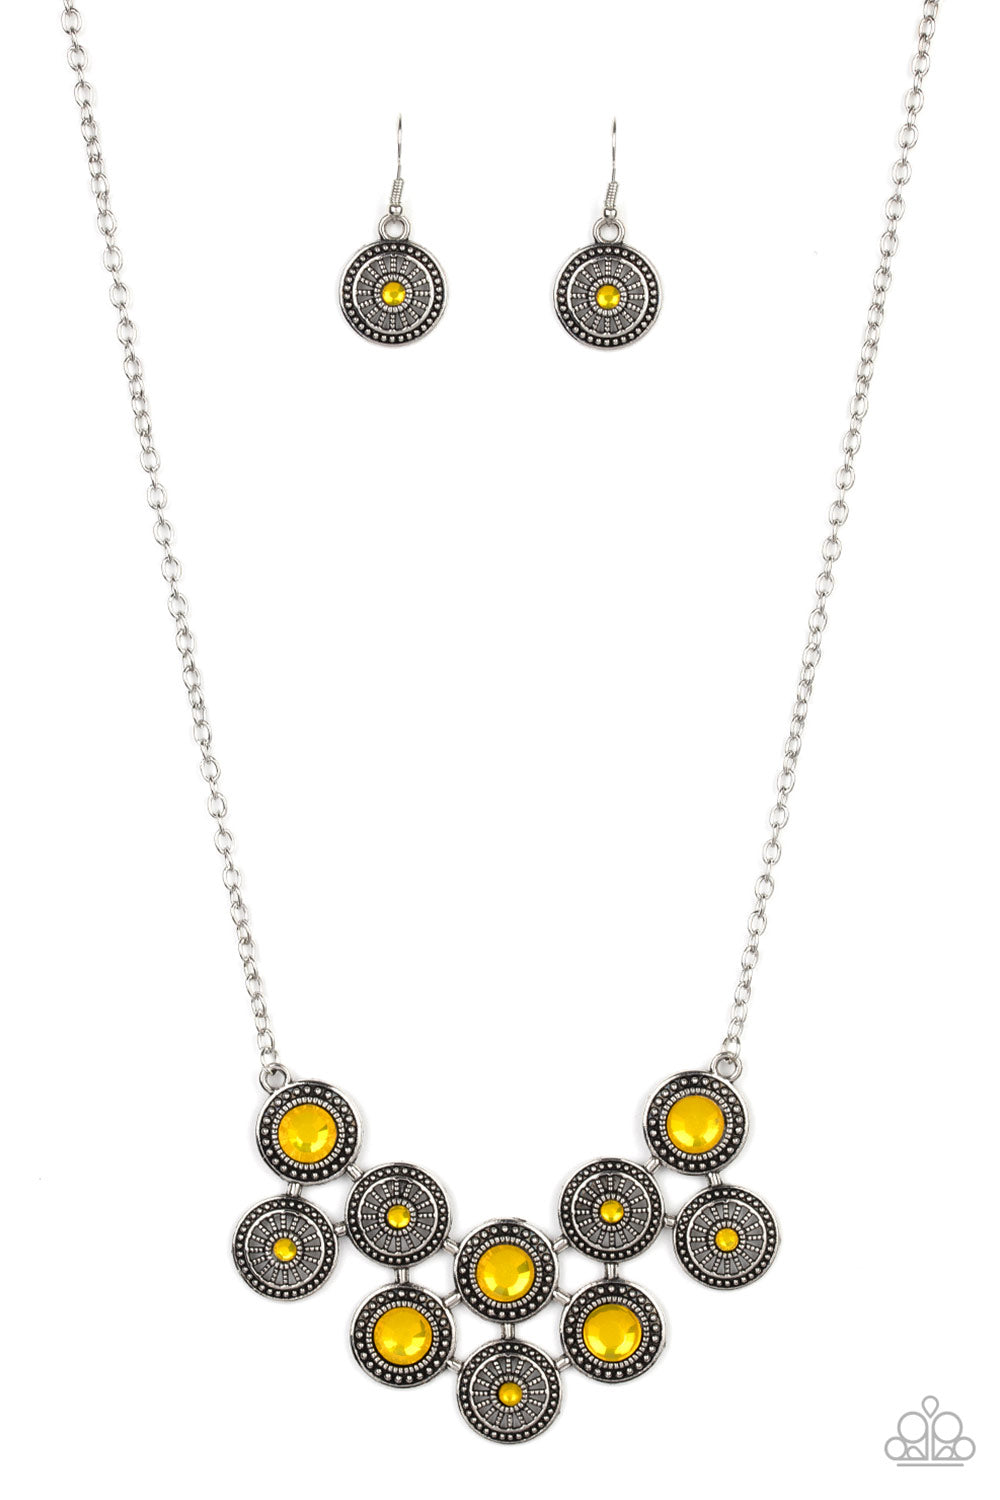 What's Your Star Sign - yellow - Paparazzi necklace